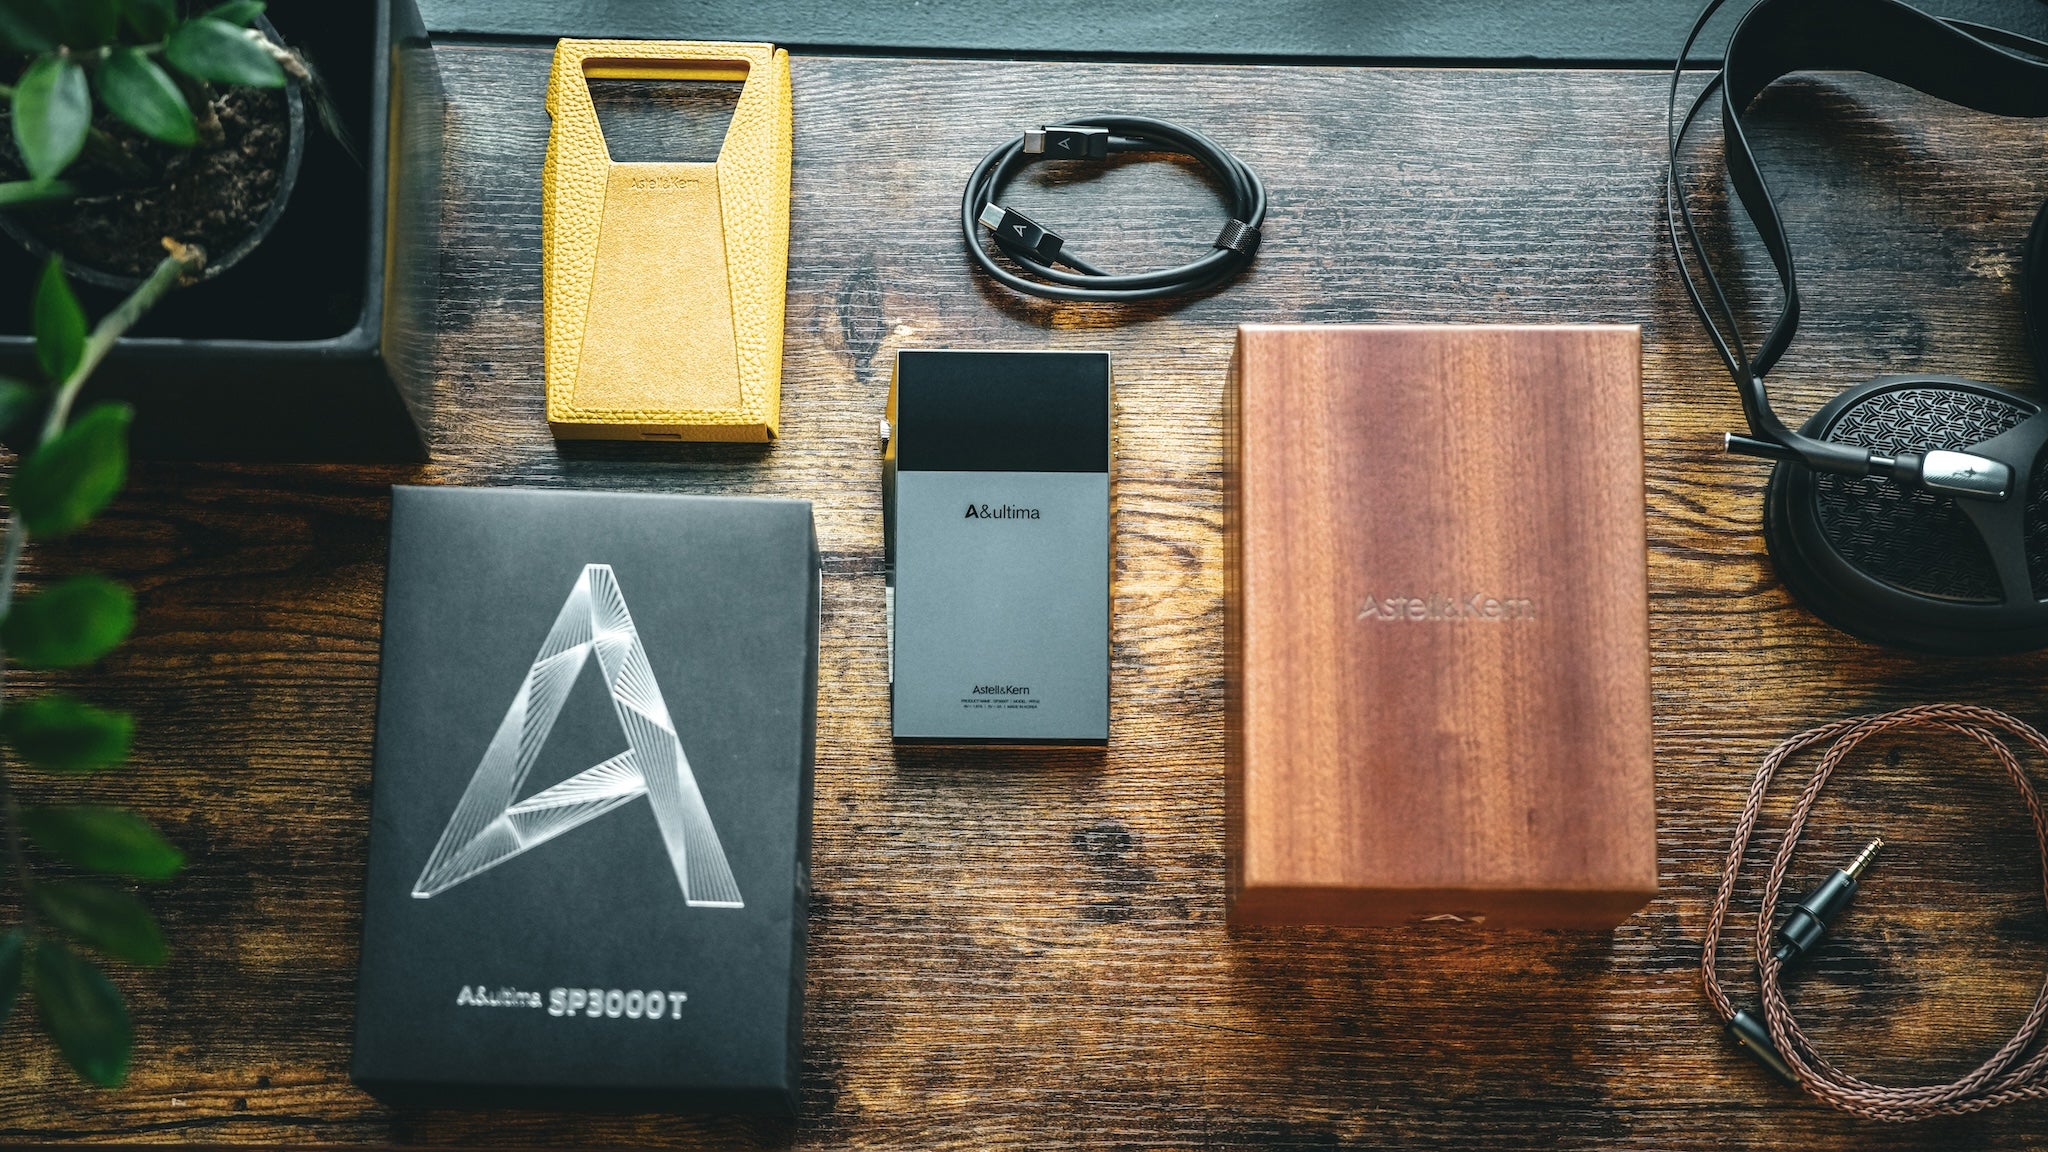 Astell&Kern SP3000T Review